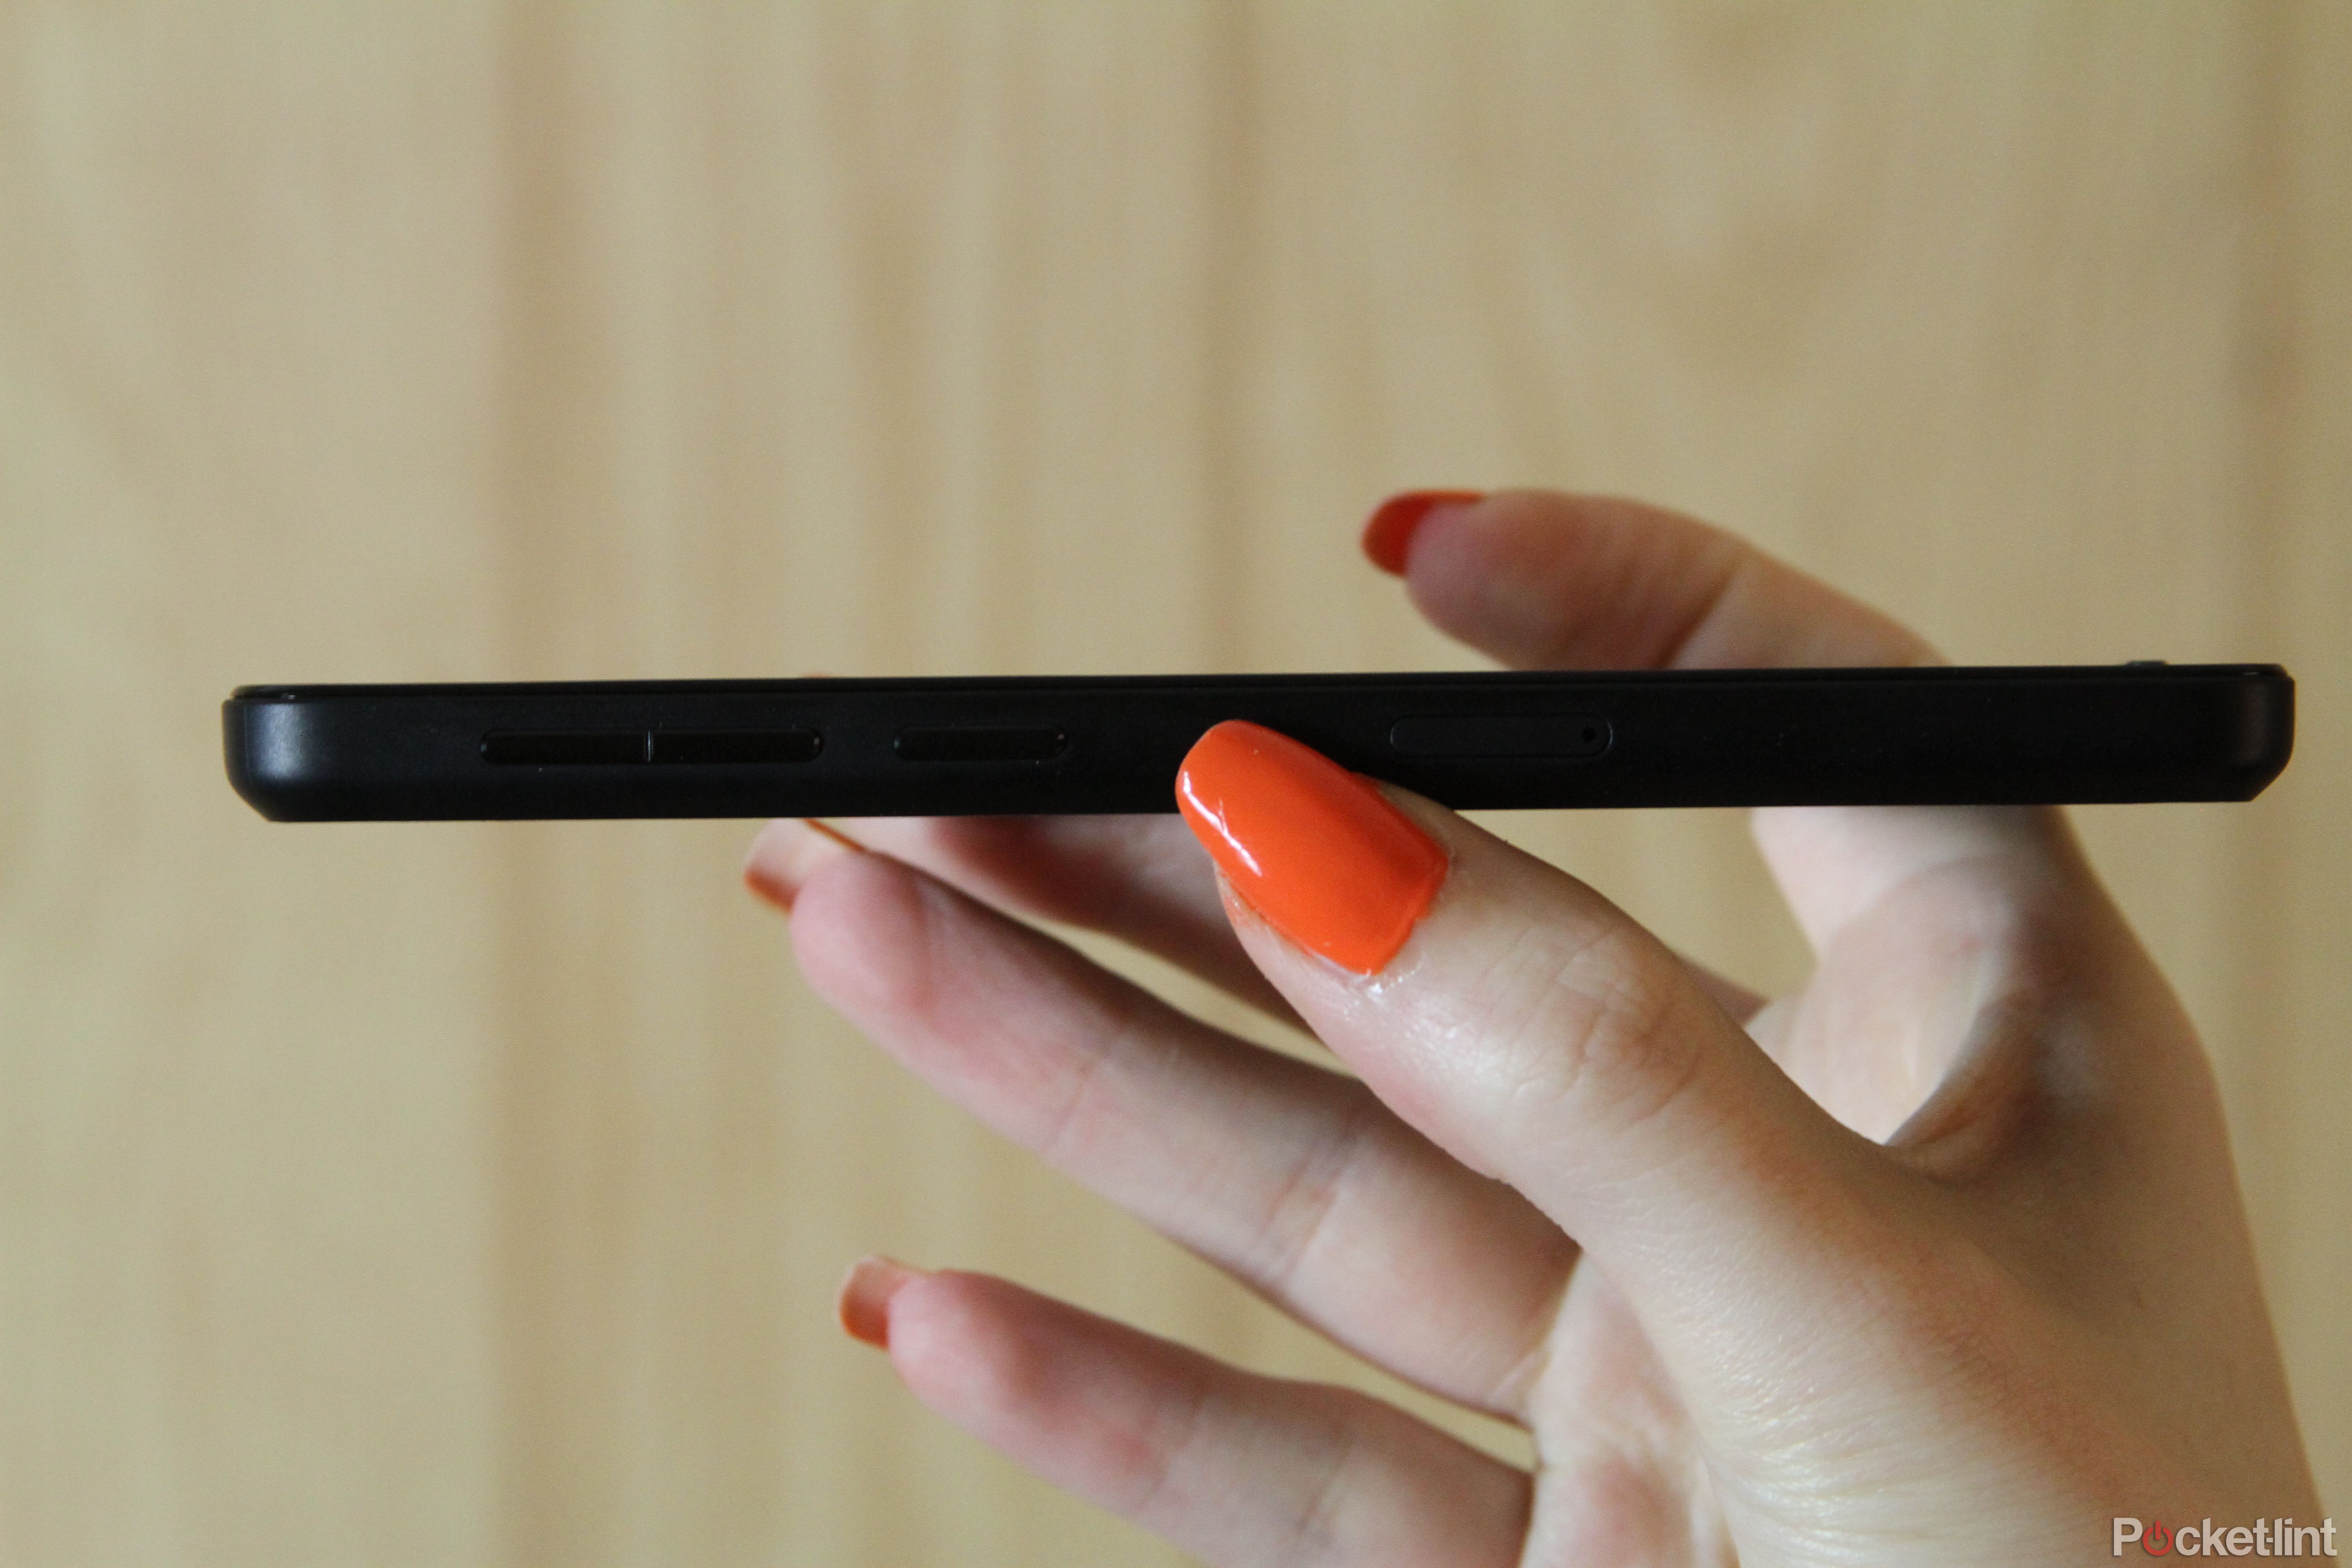 amazon fire phone review image 7